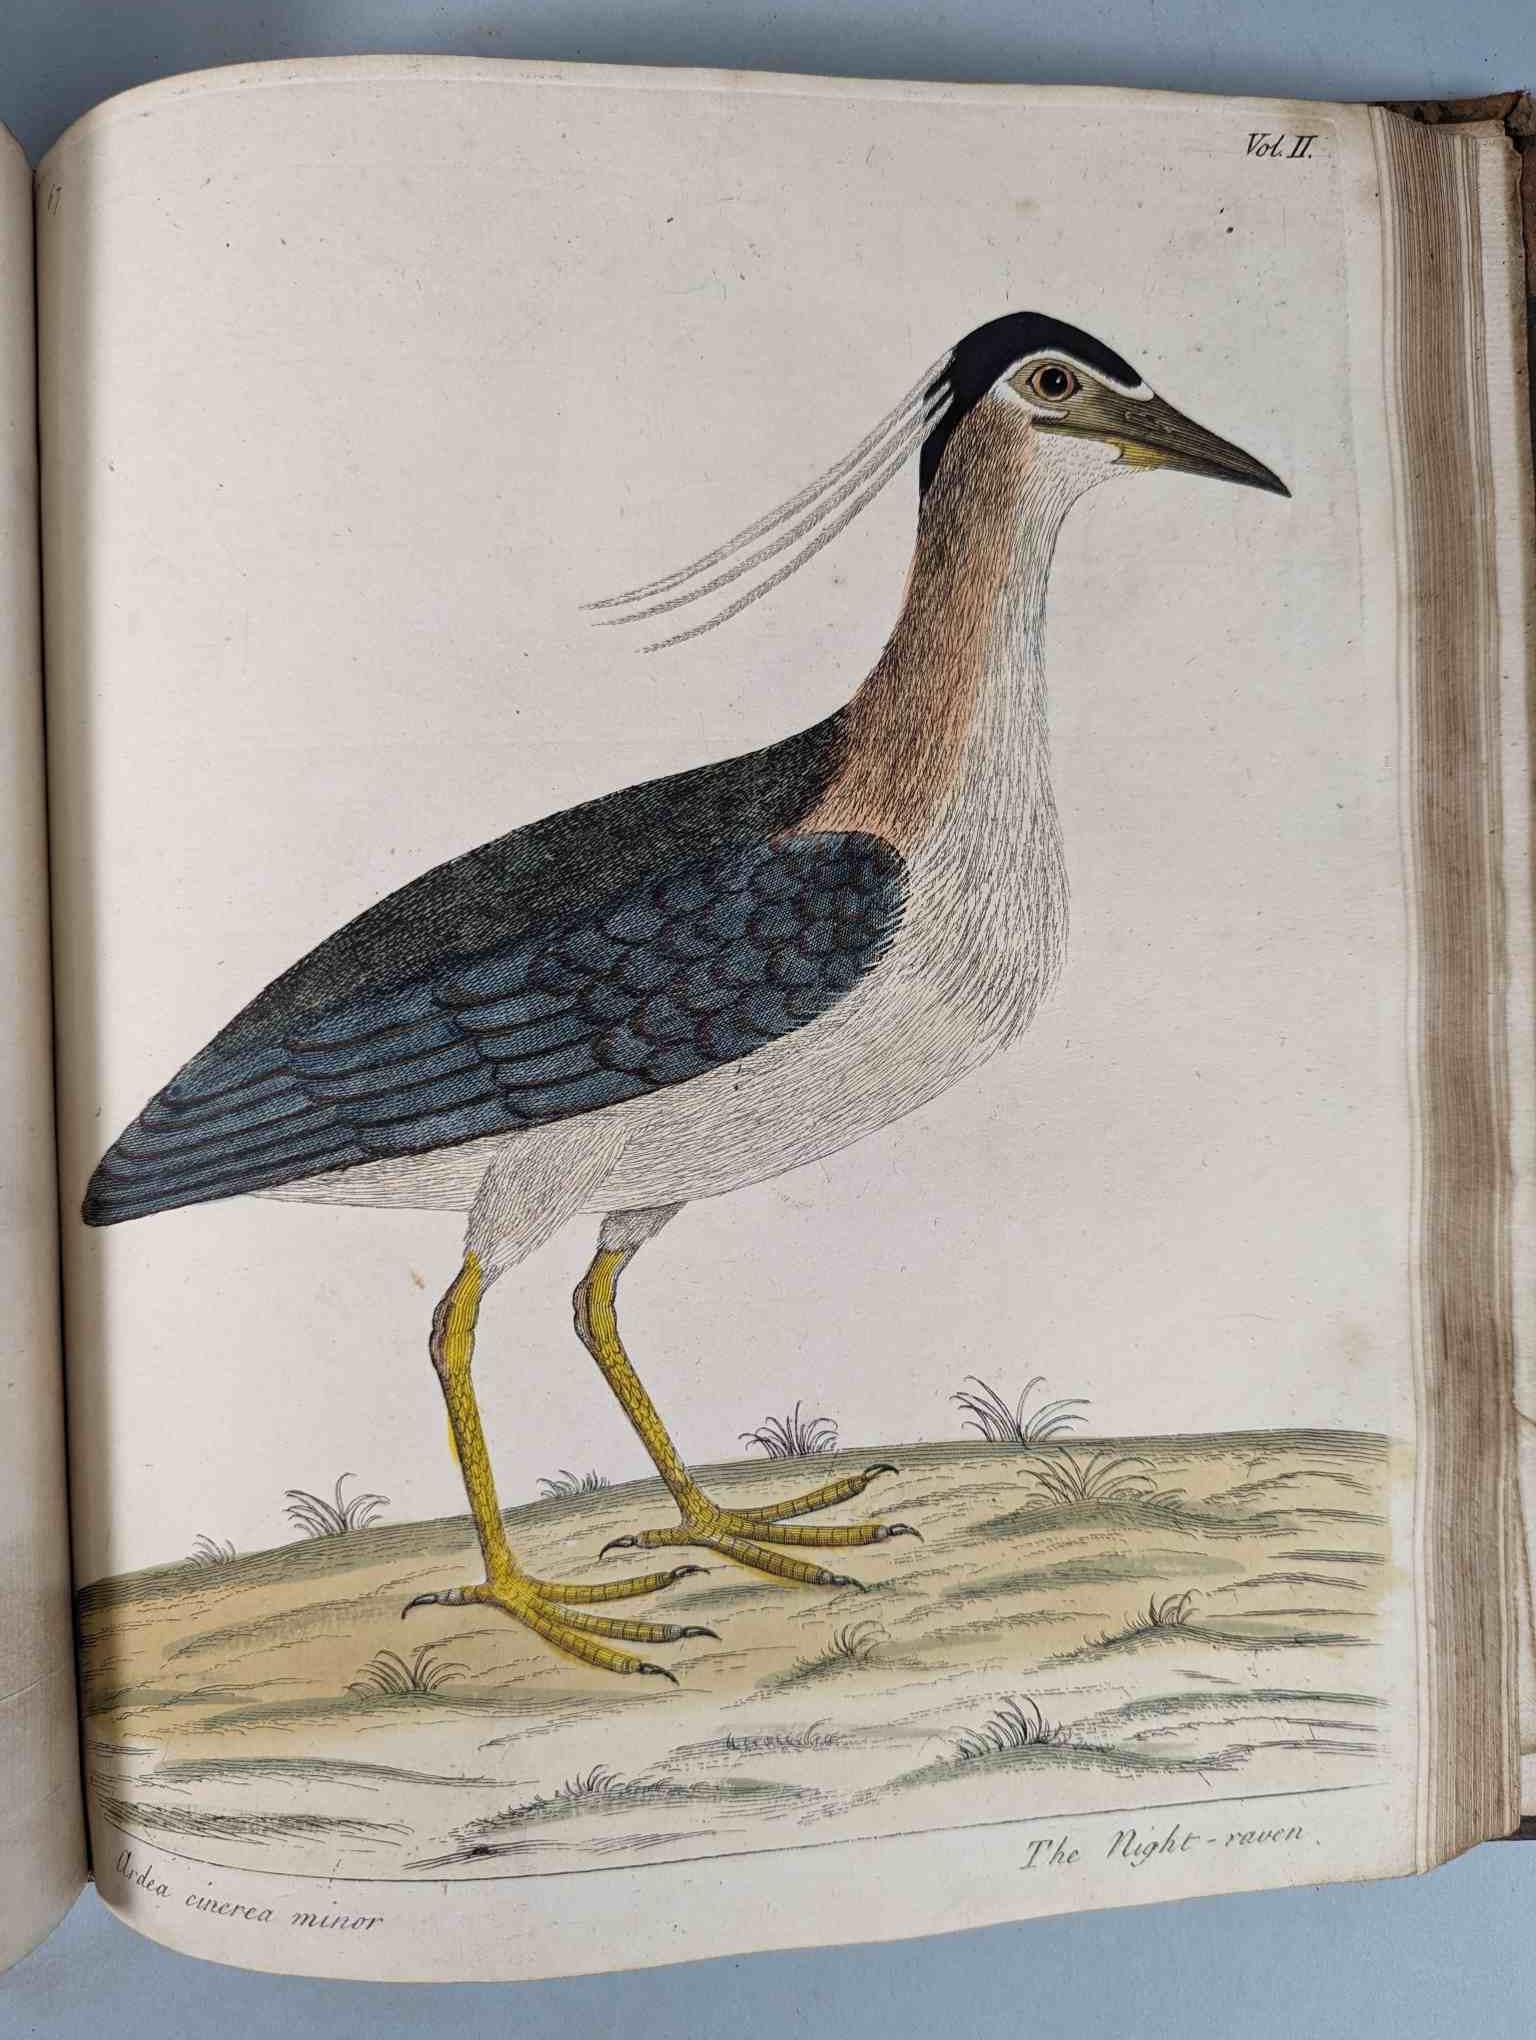 ALBIN, Eleazar. A Natural History of Birds, to which are added, Notes and Observations by W. - Image 171 of 208